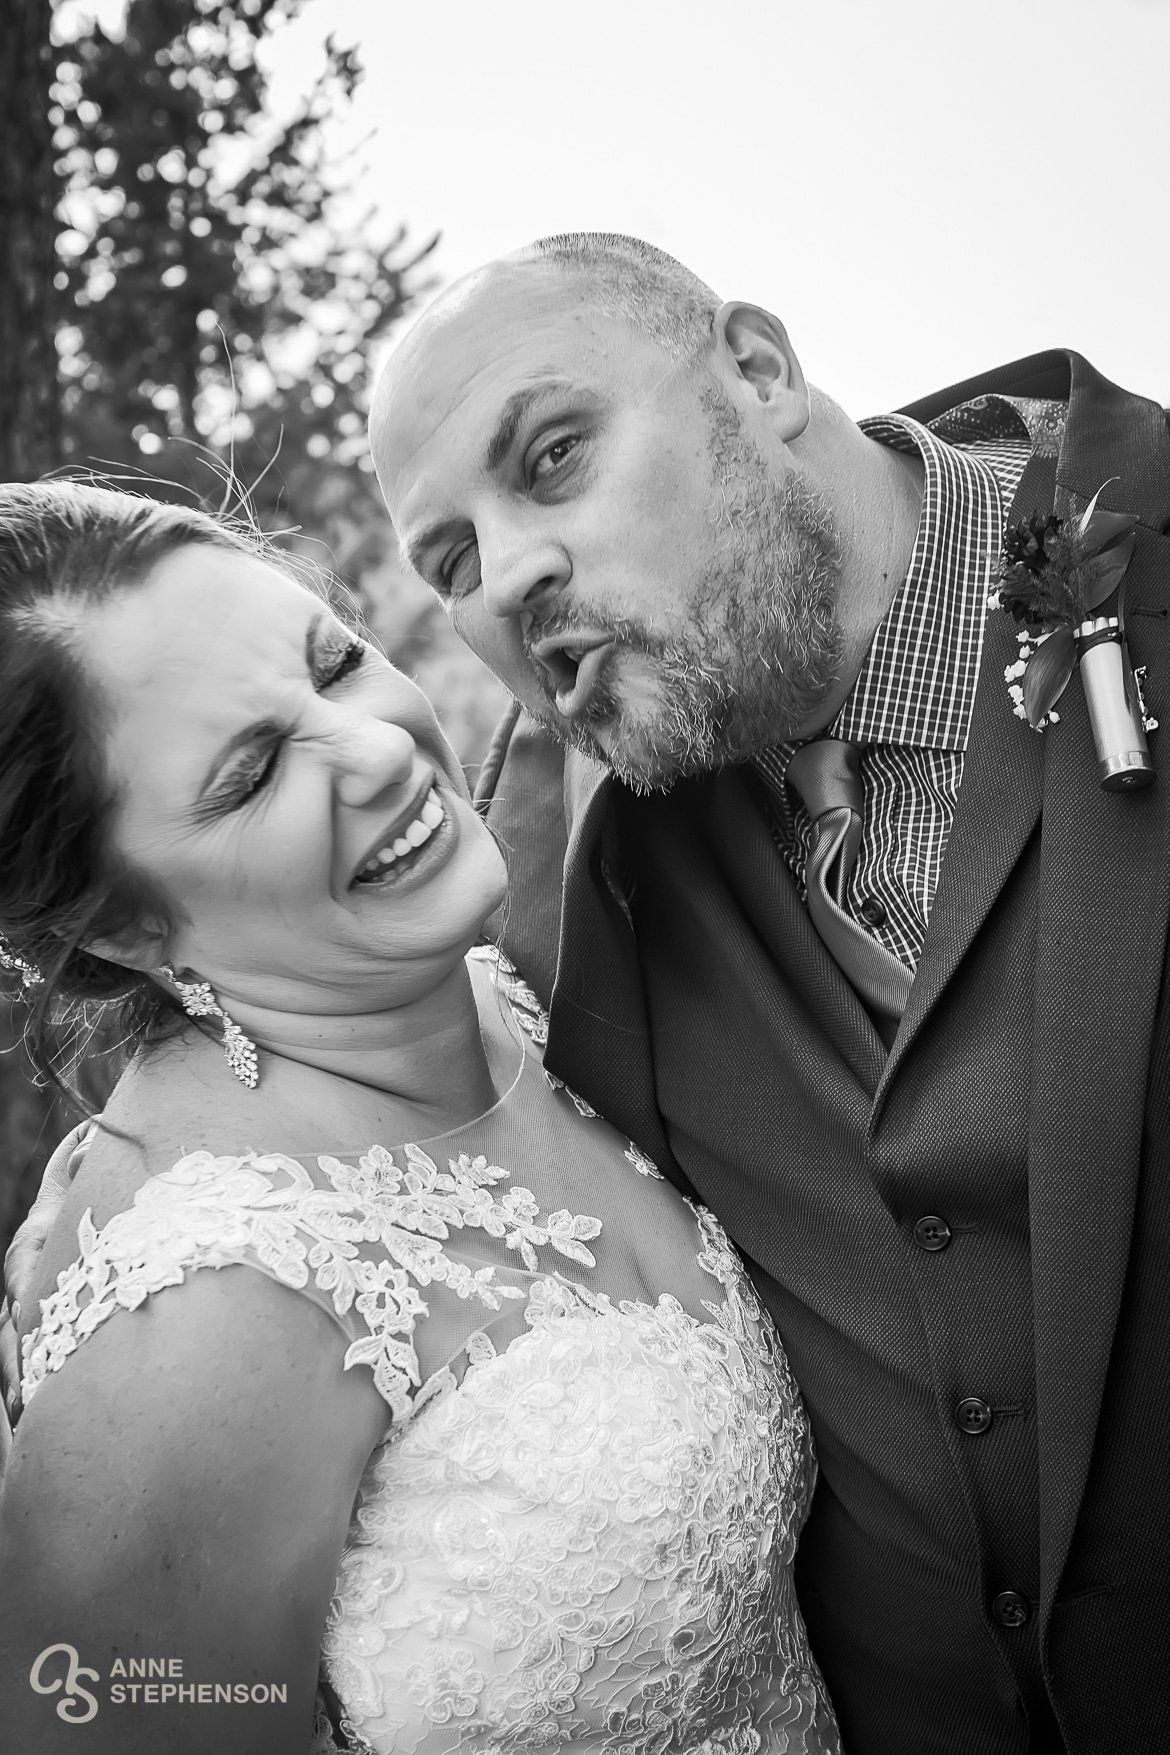 A groom makes funny faces at his bride during their post-wedding photo session.